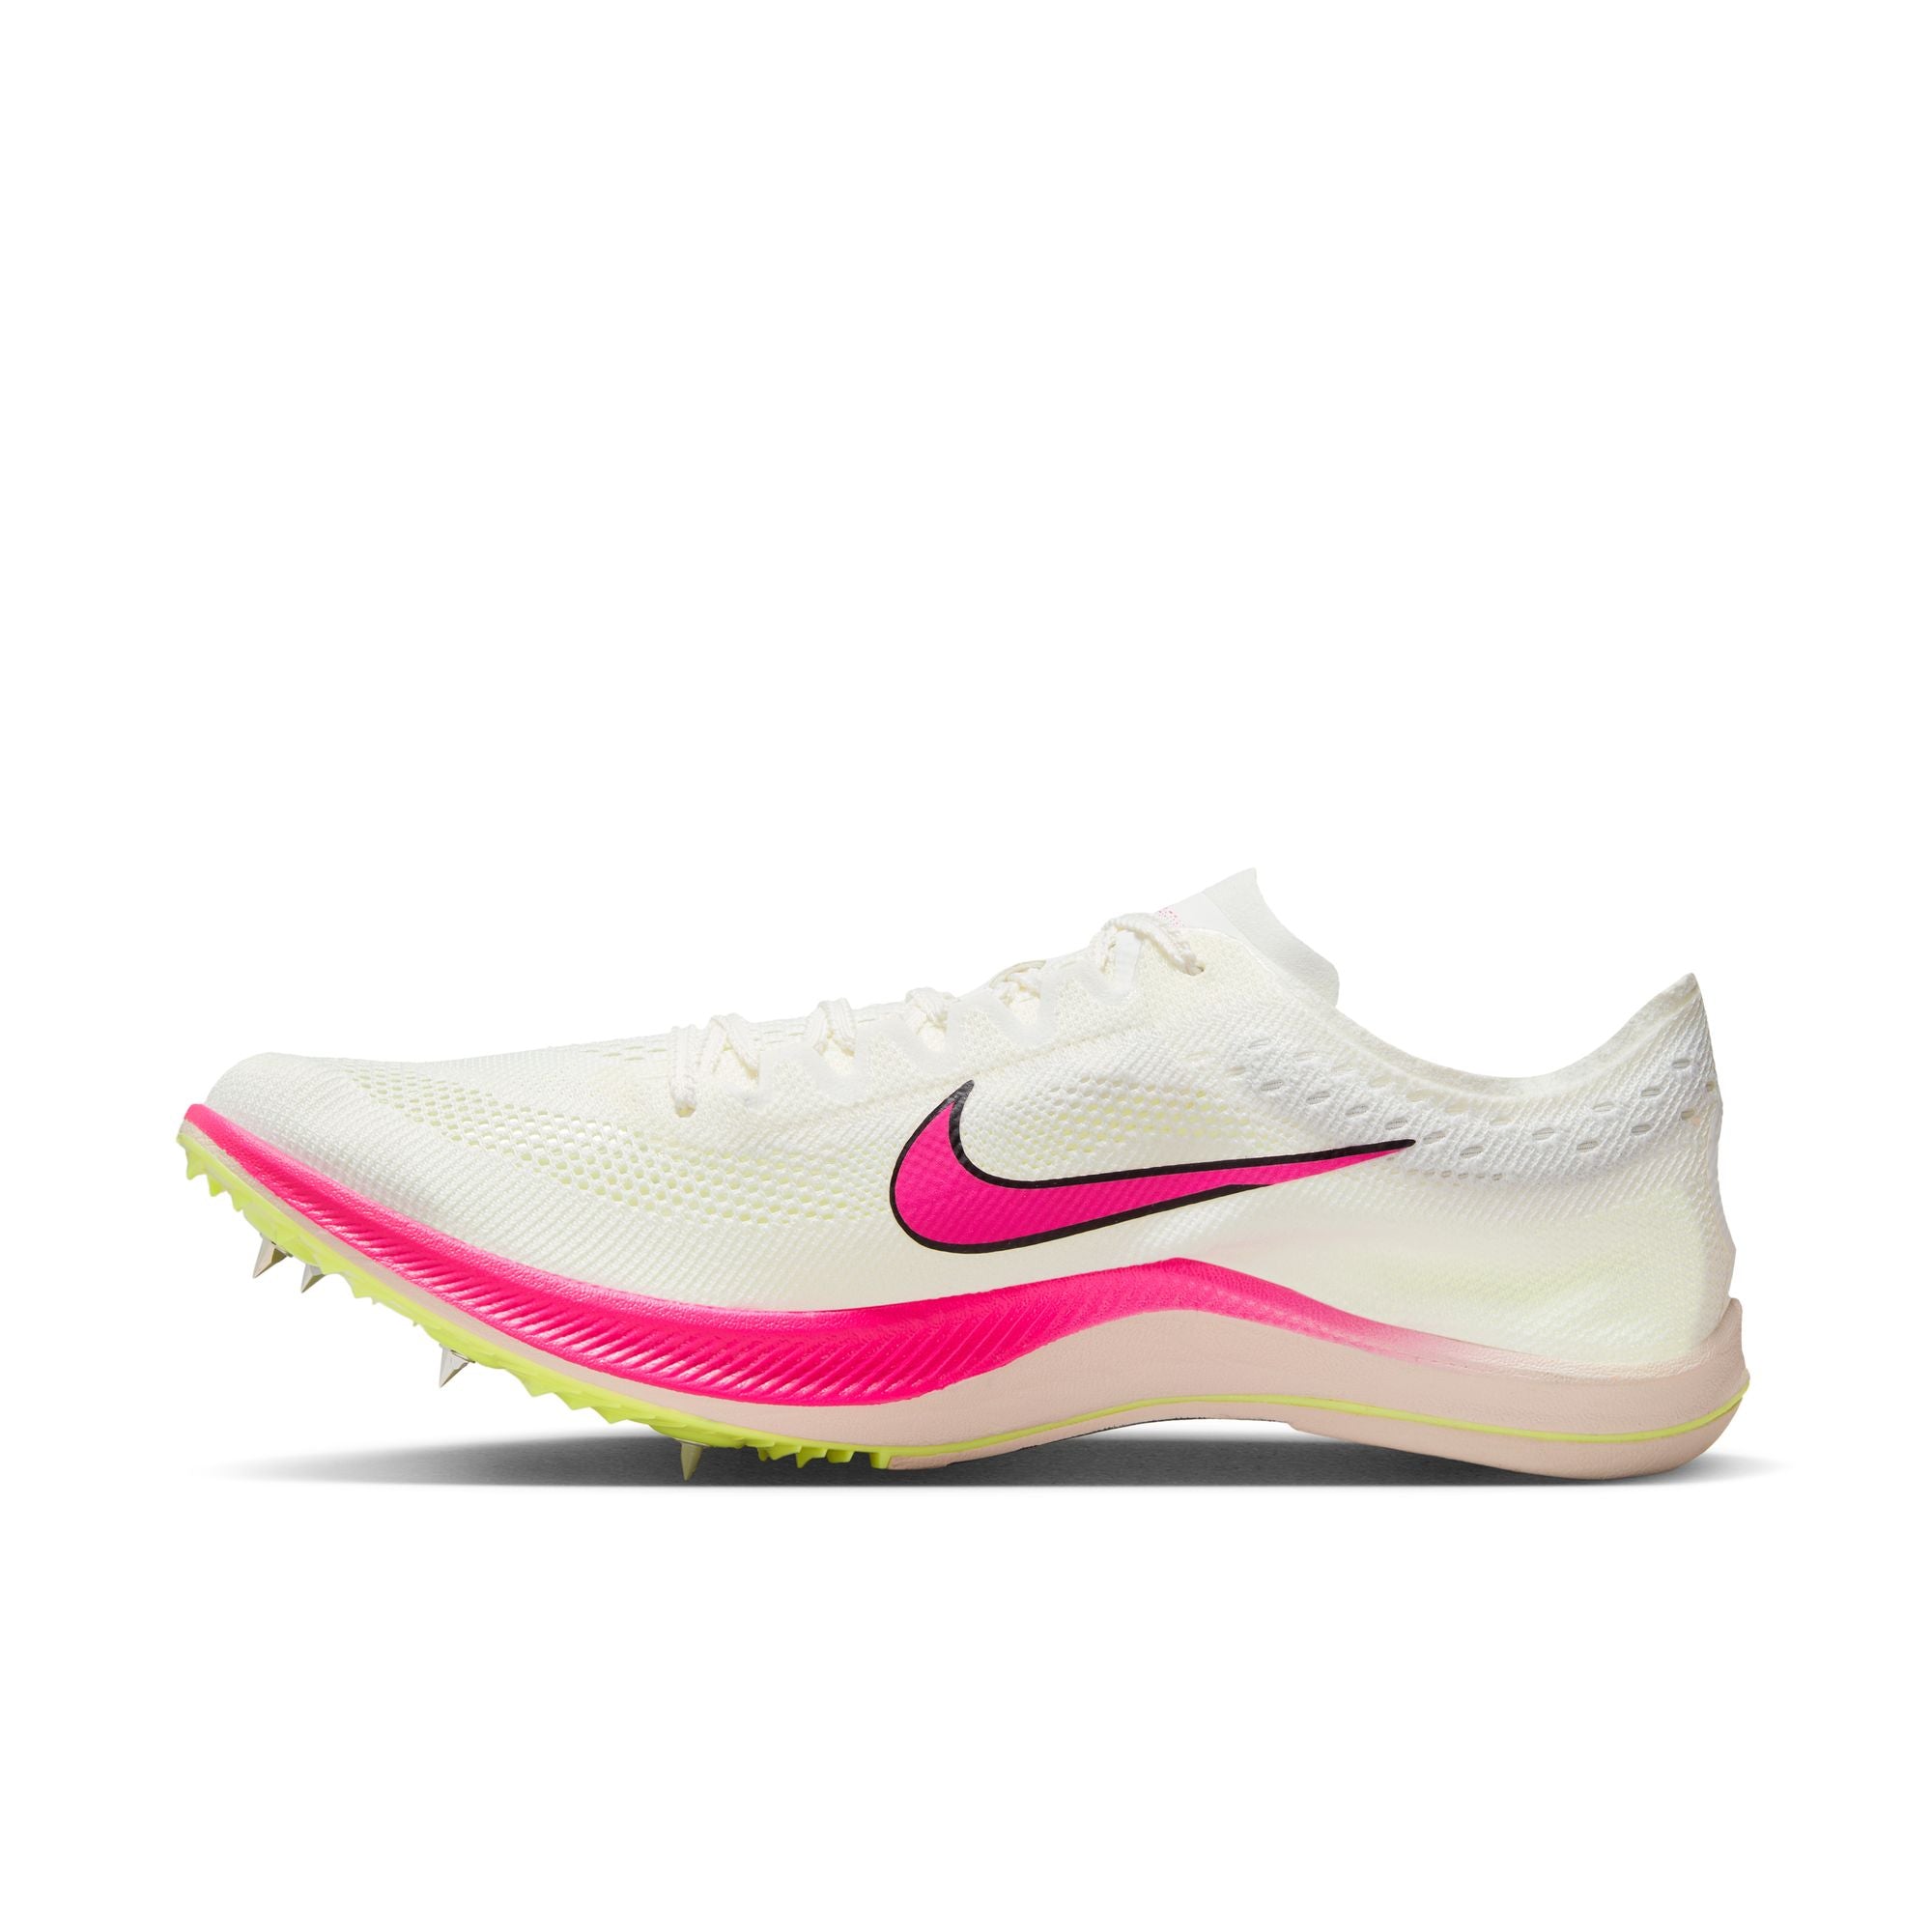 ZOOMX DRAGONFLY - 101 SAIL/FIERCE PINK | Performance Running ...